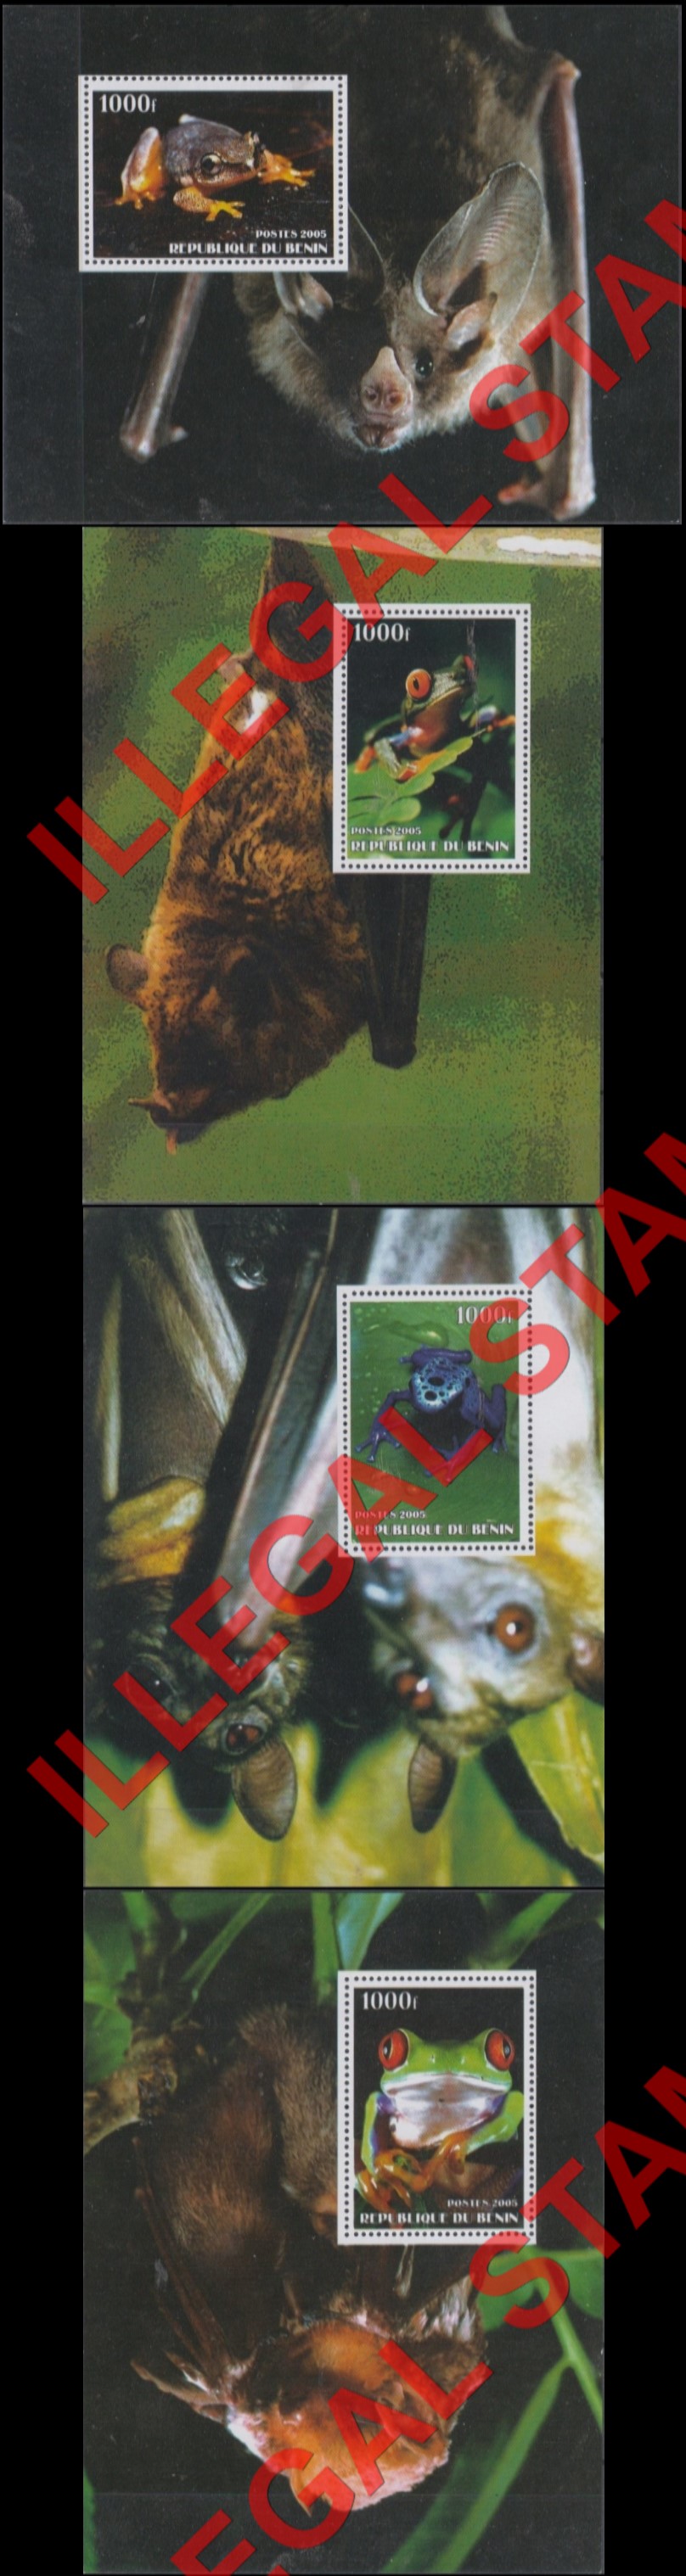 Benin 2005 Bats and Frogs Illegal Stamp Souvenir Sheets of 1